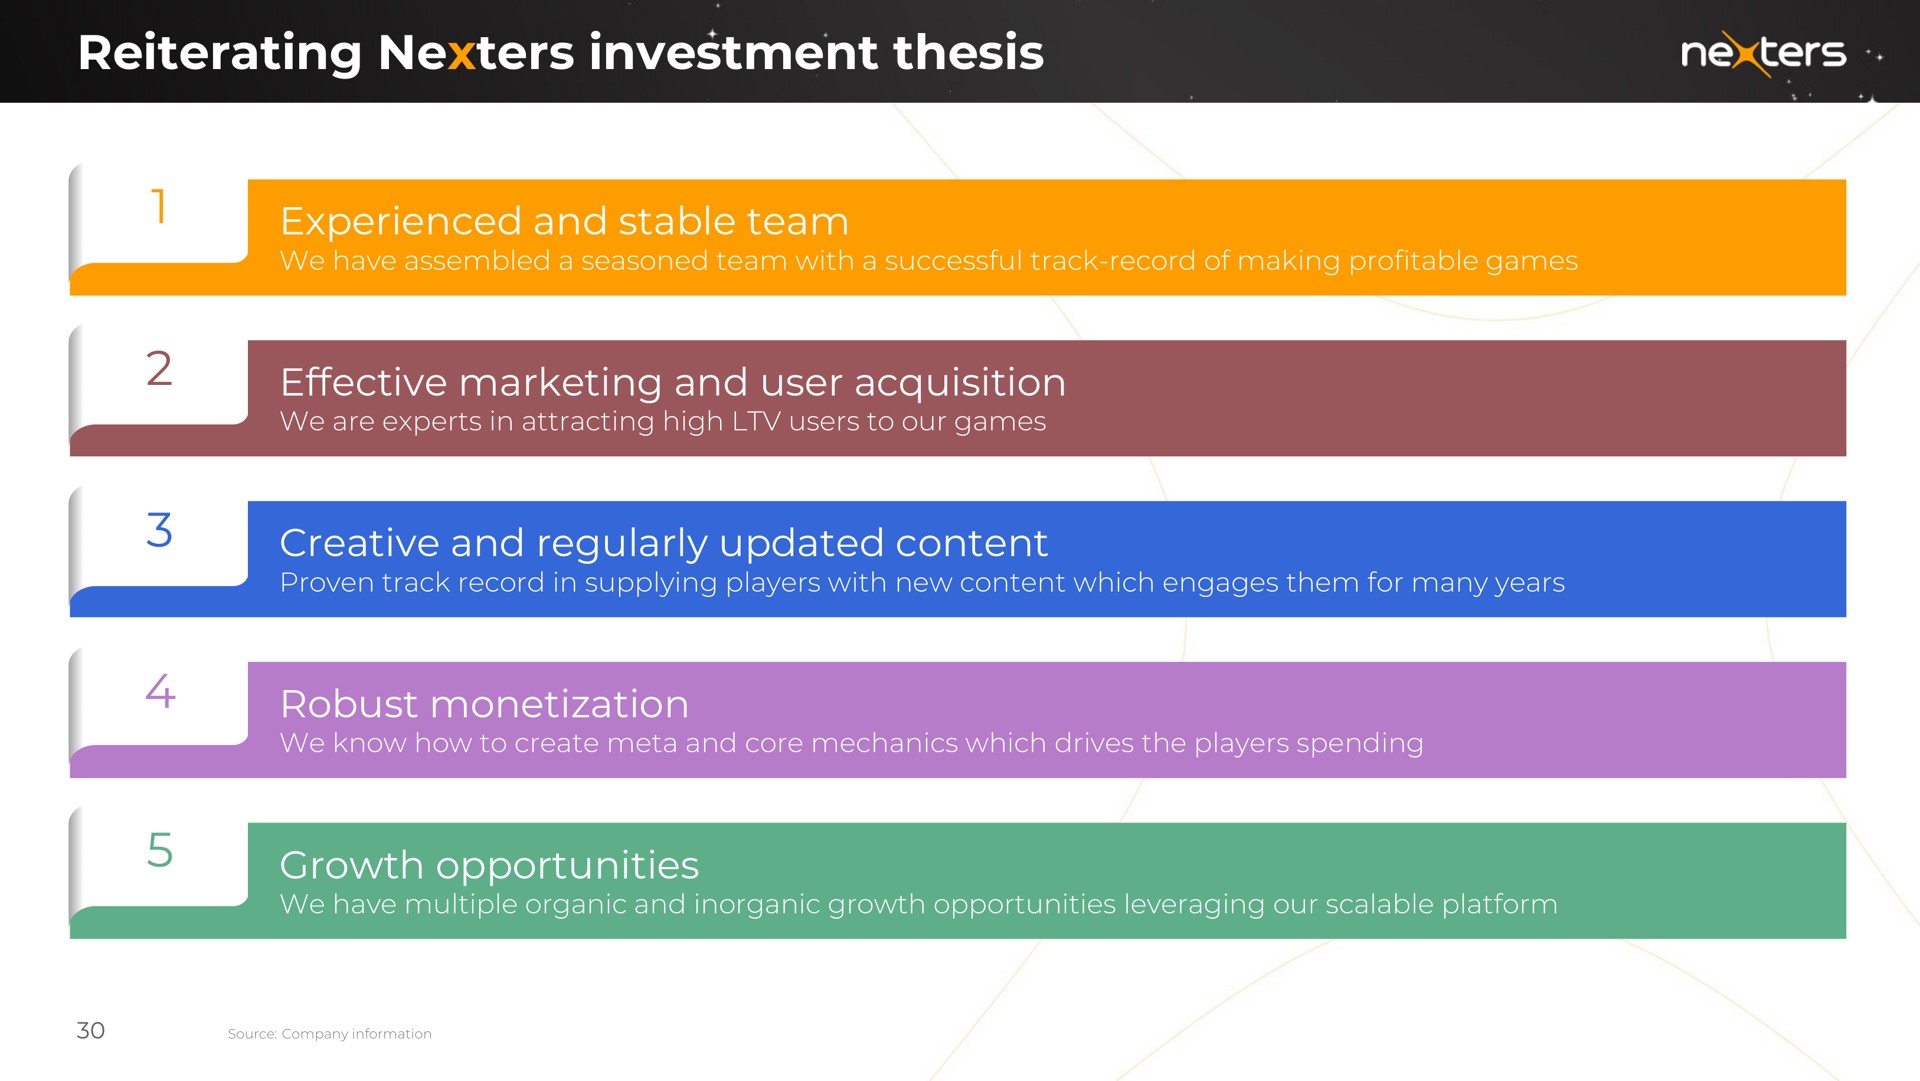 reiterating investment thesis experienced and stable team effective marketing and user acquisition creative and regularly updated content robust monetization growth opportunities | Nexters